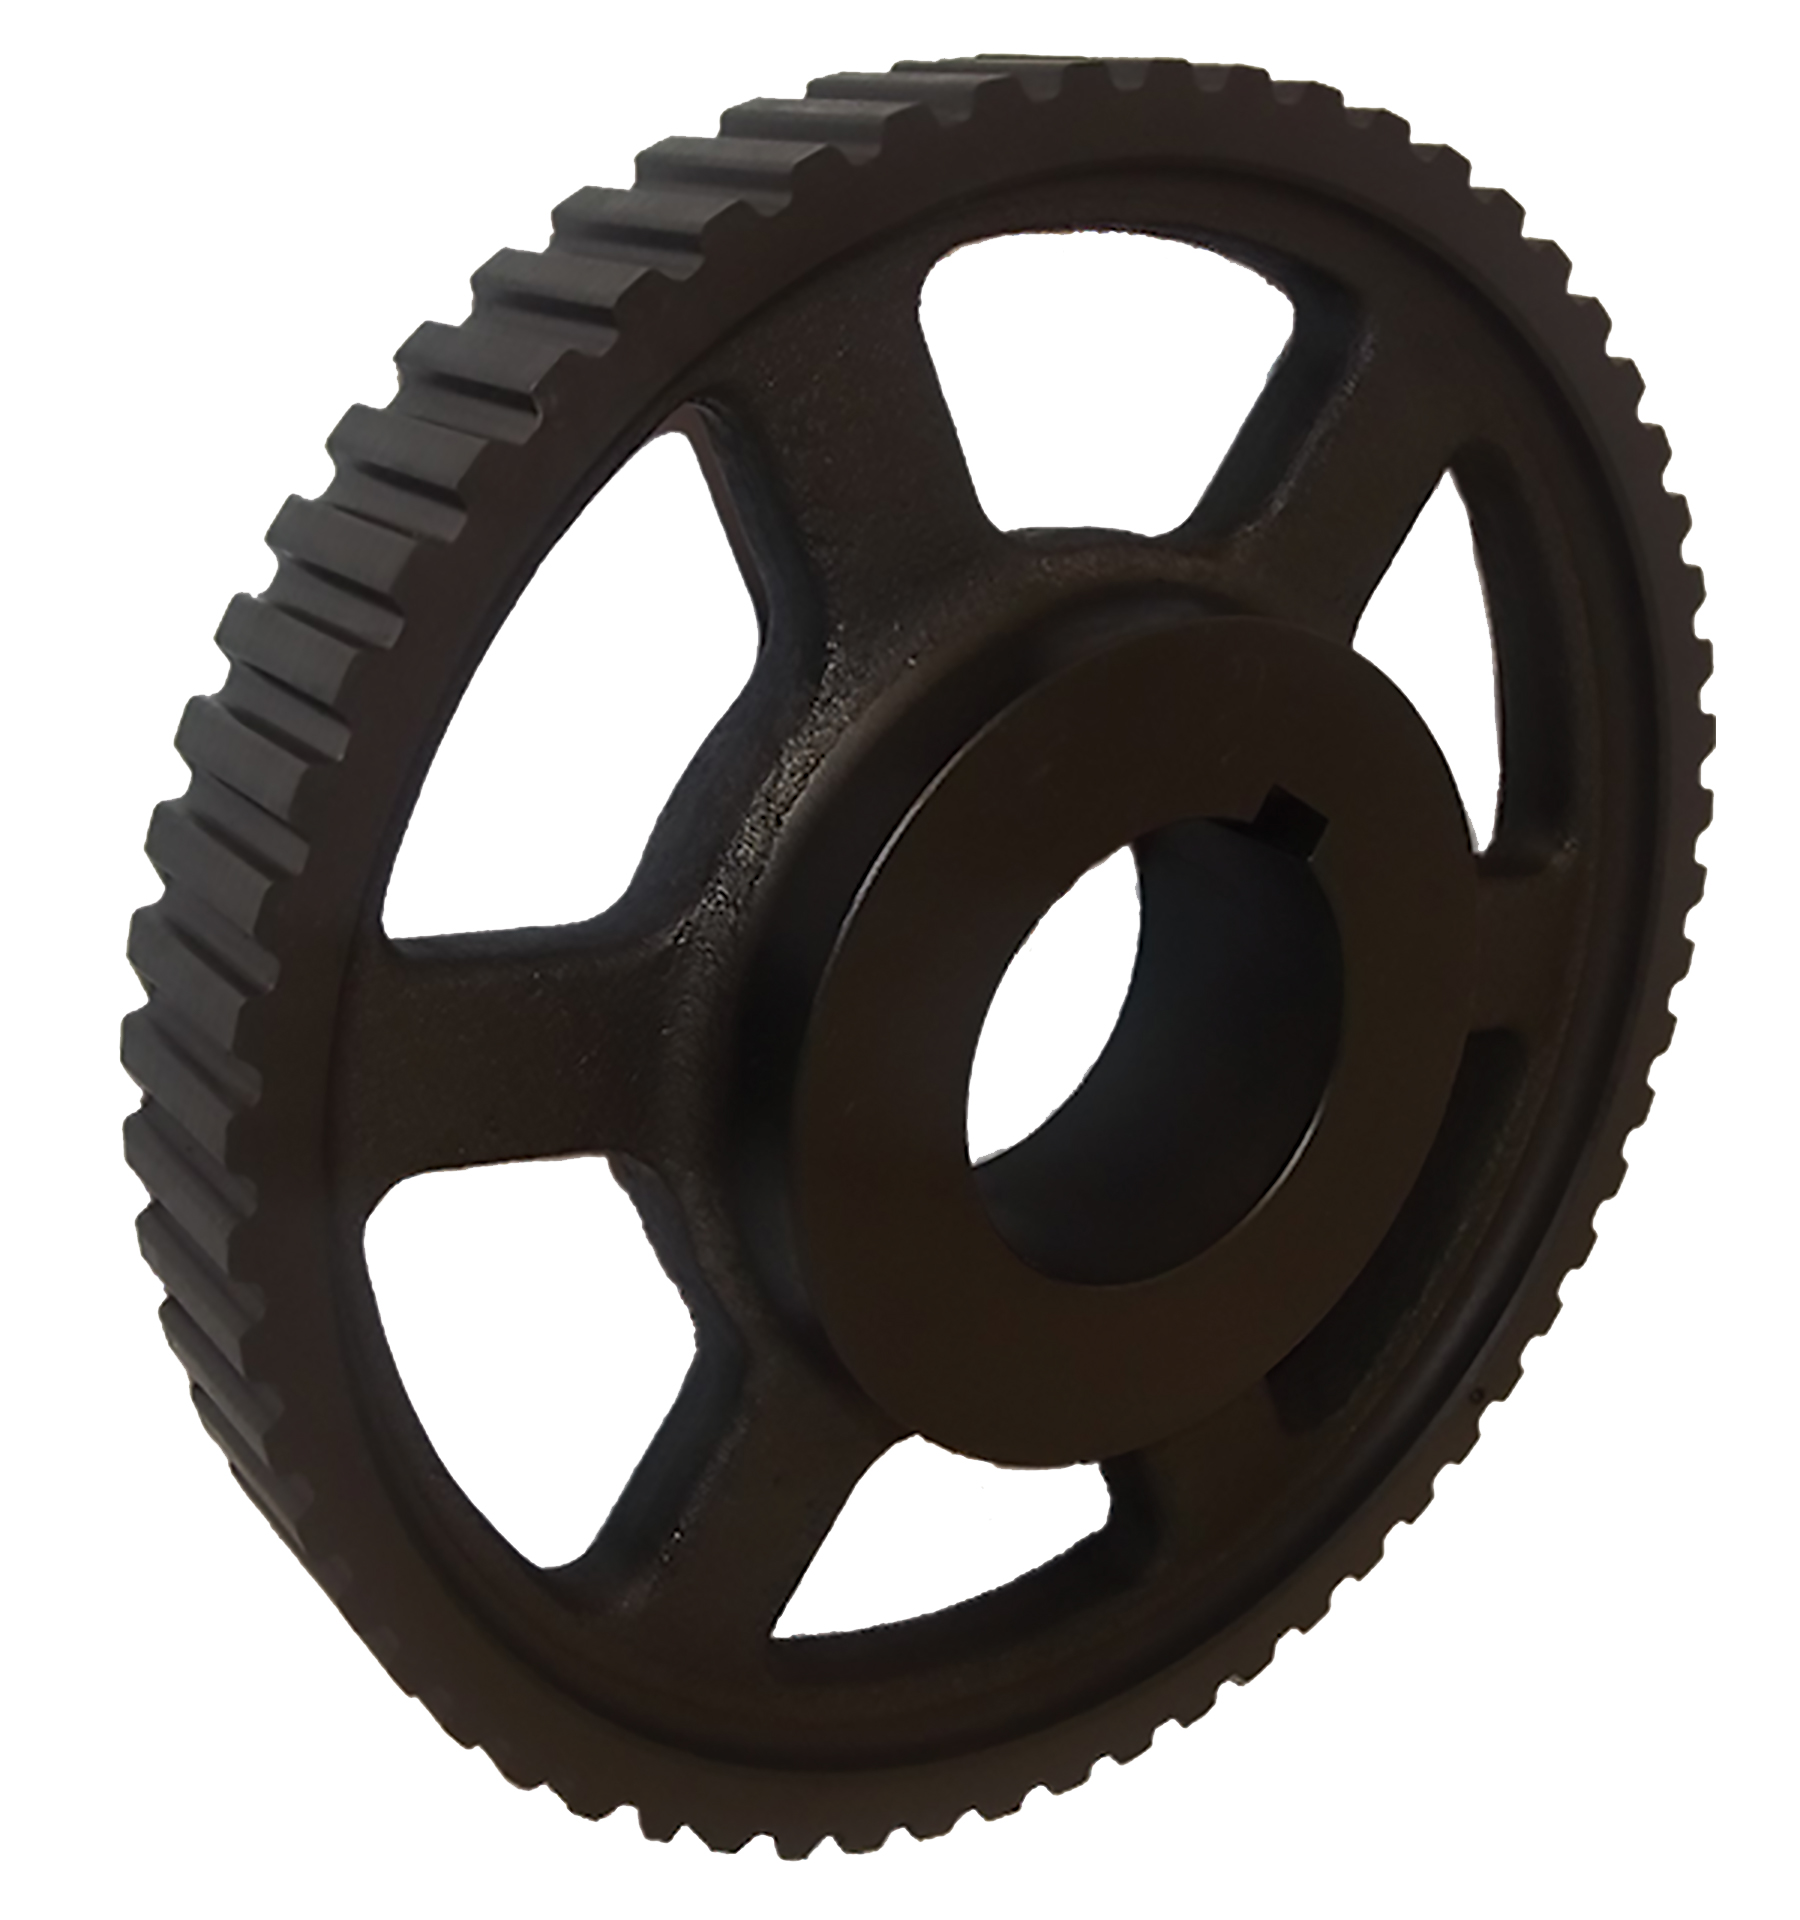 84LP075 - Cast Iron Imperial Pitch Pulleys